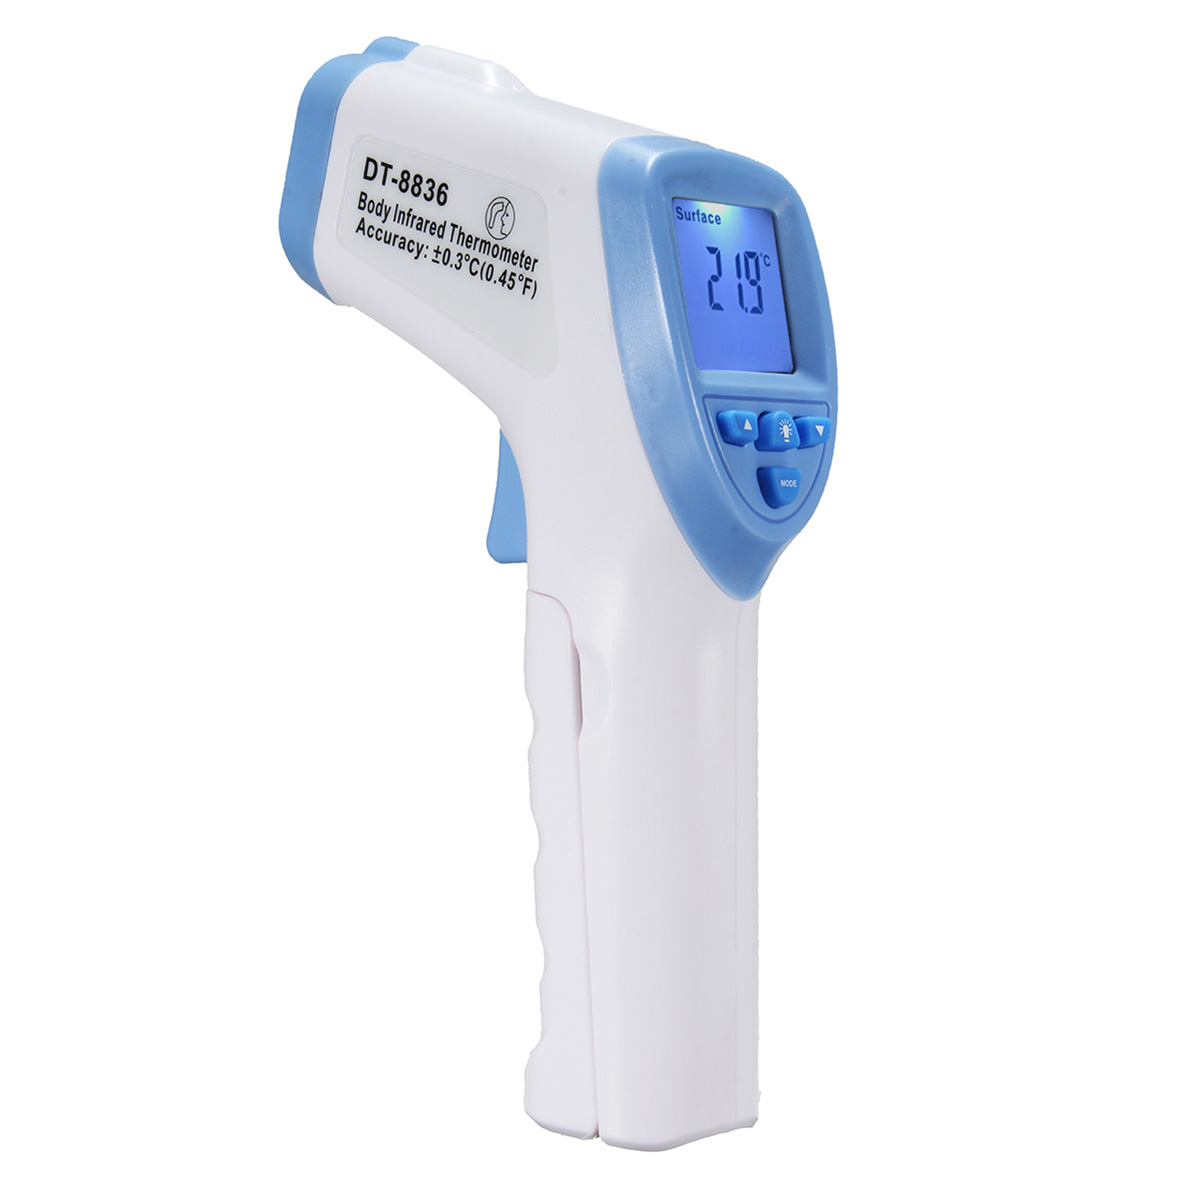 Digital-Non-Contact-No-Touch-Infrared-Forehead-Thermometer-DigitalThermometer-Measuring-Range-32-425-1132170-3